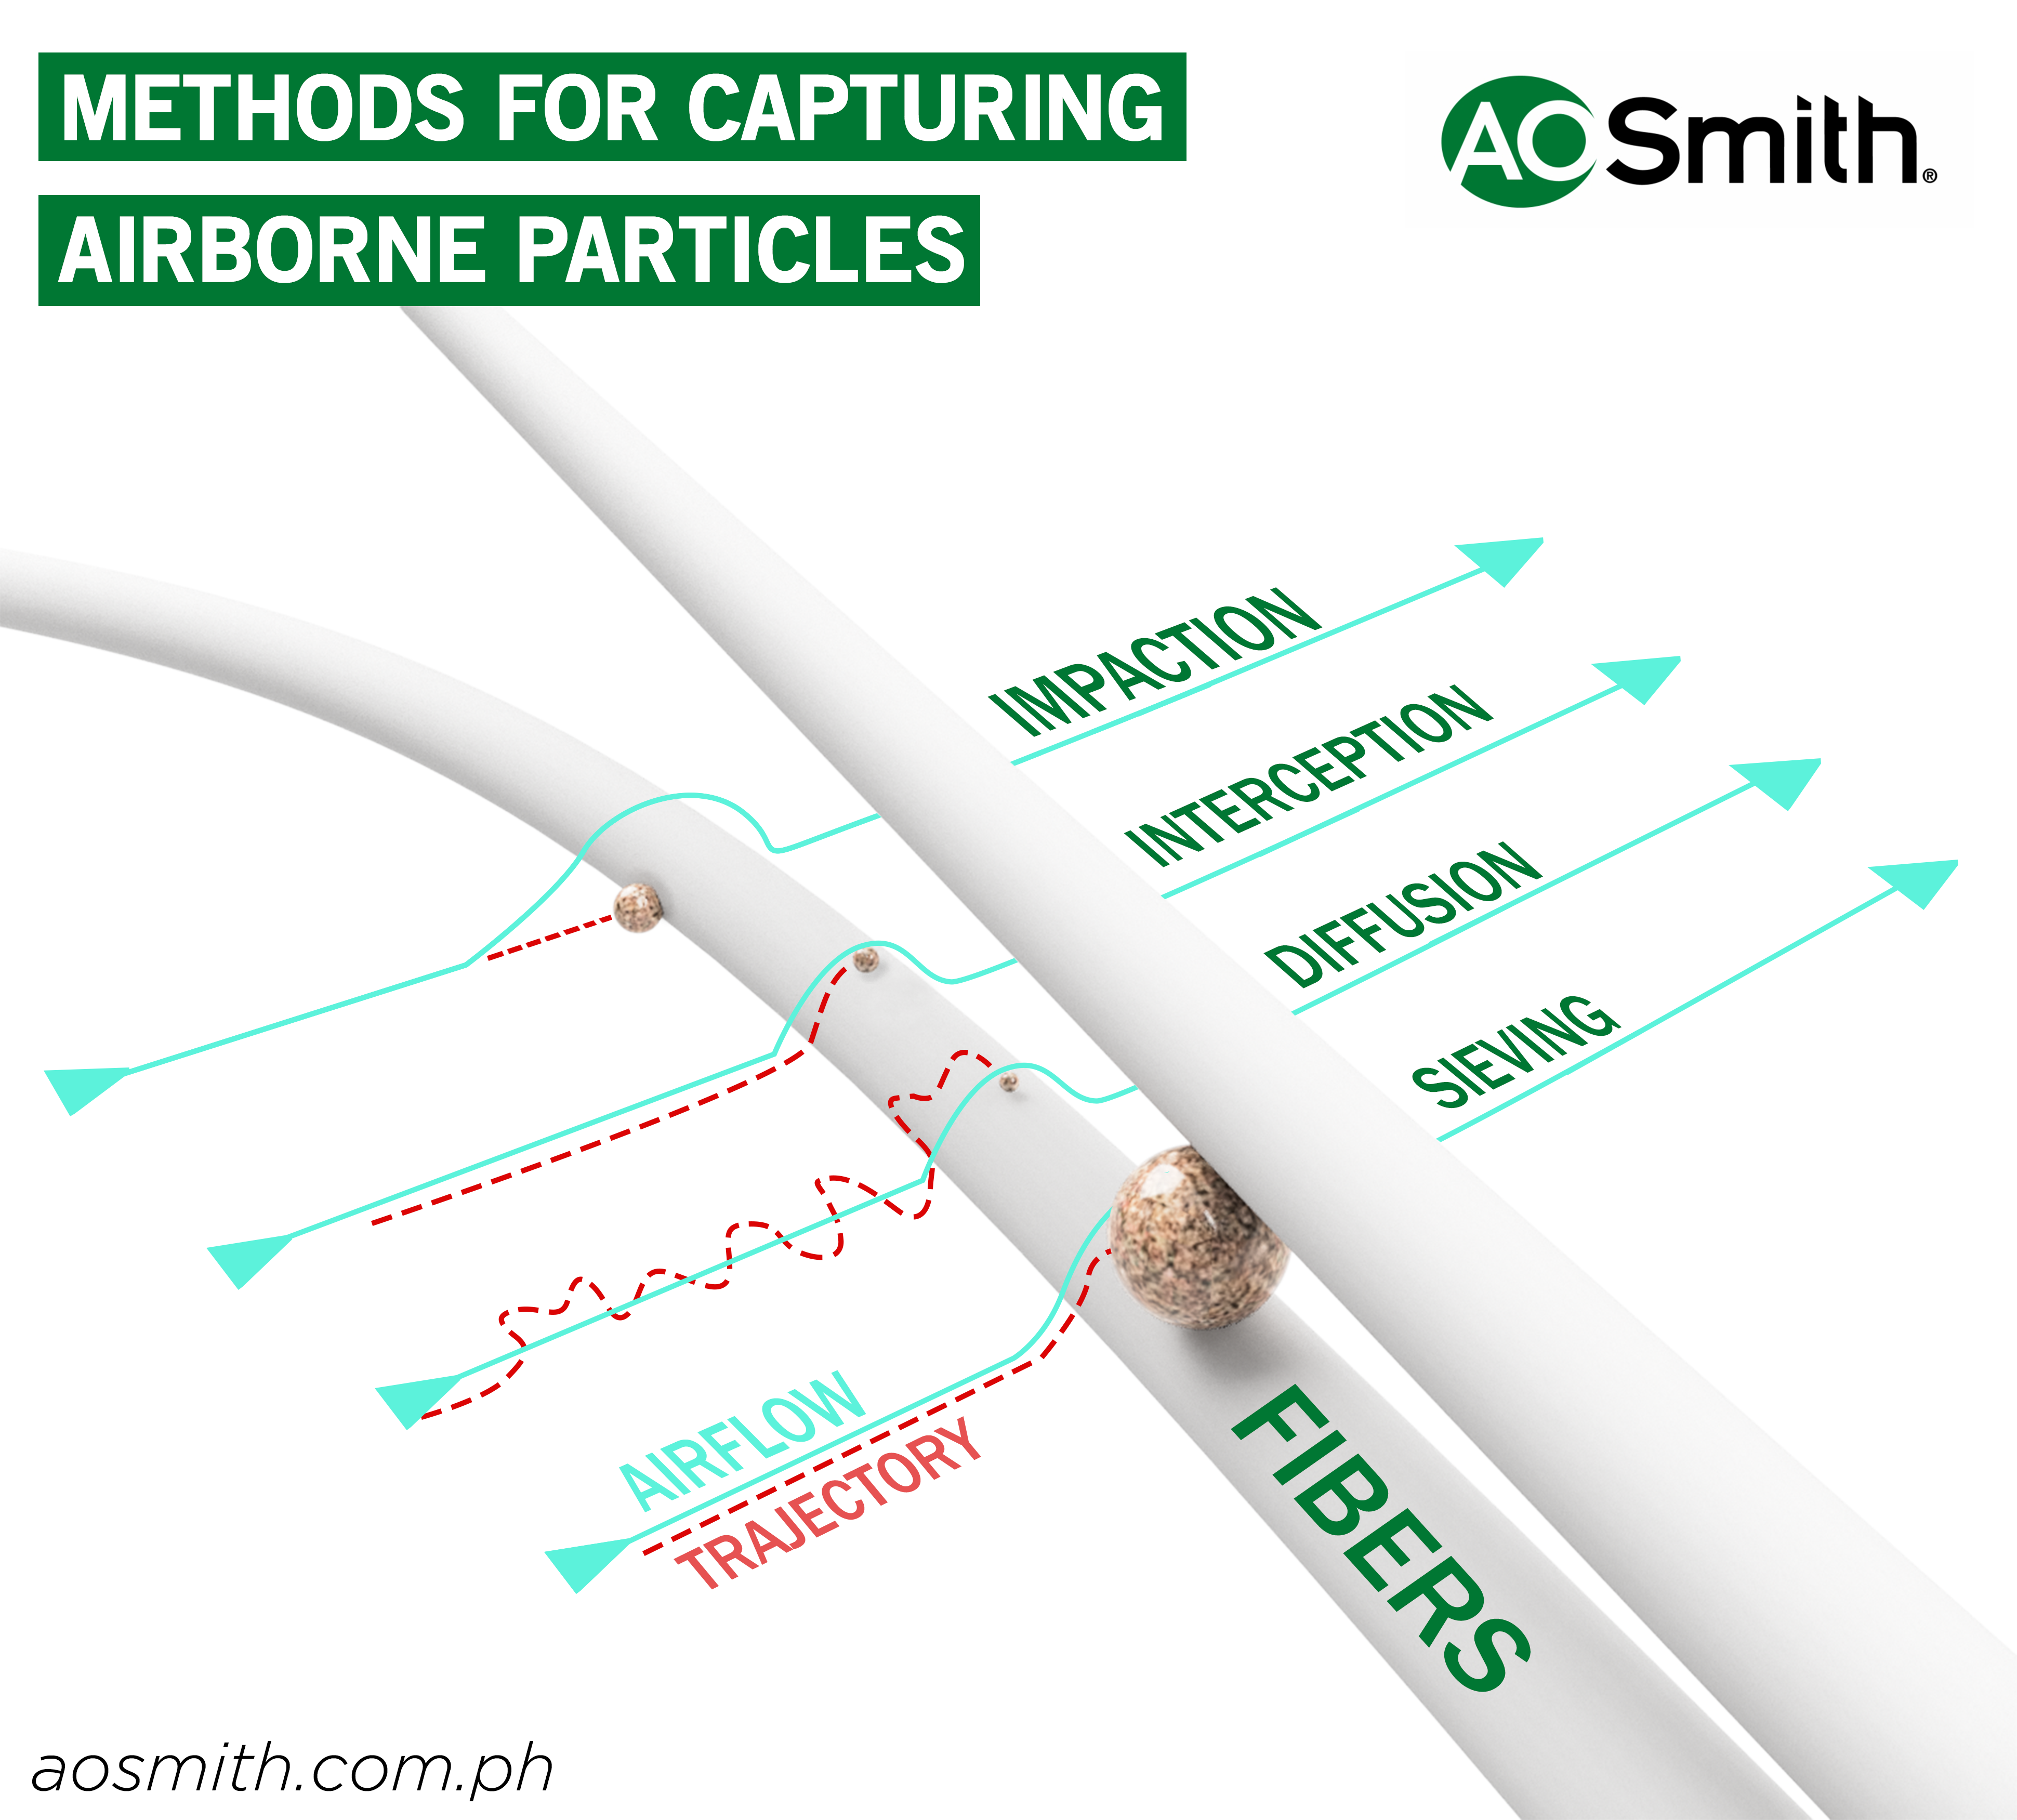 Methods for capturing particles